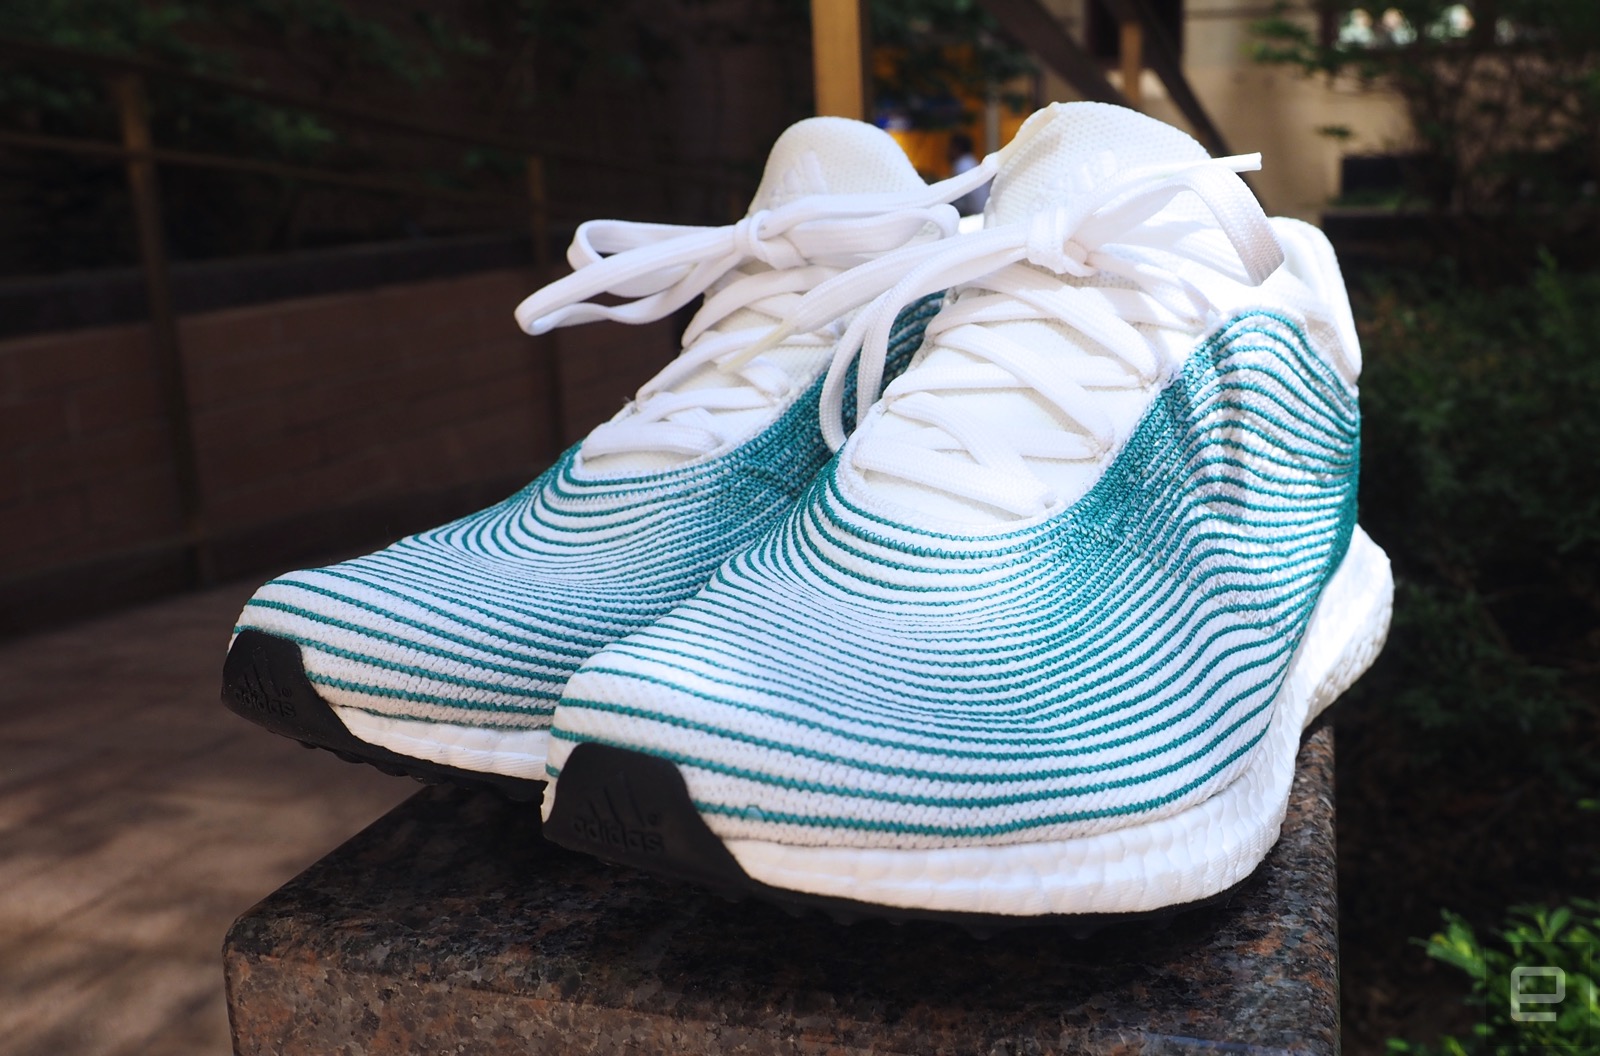 Productos lácteos Corta vida Manifestación Adidas gets creative with shoes made from recycled ocean plastic | Engadget